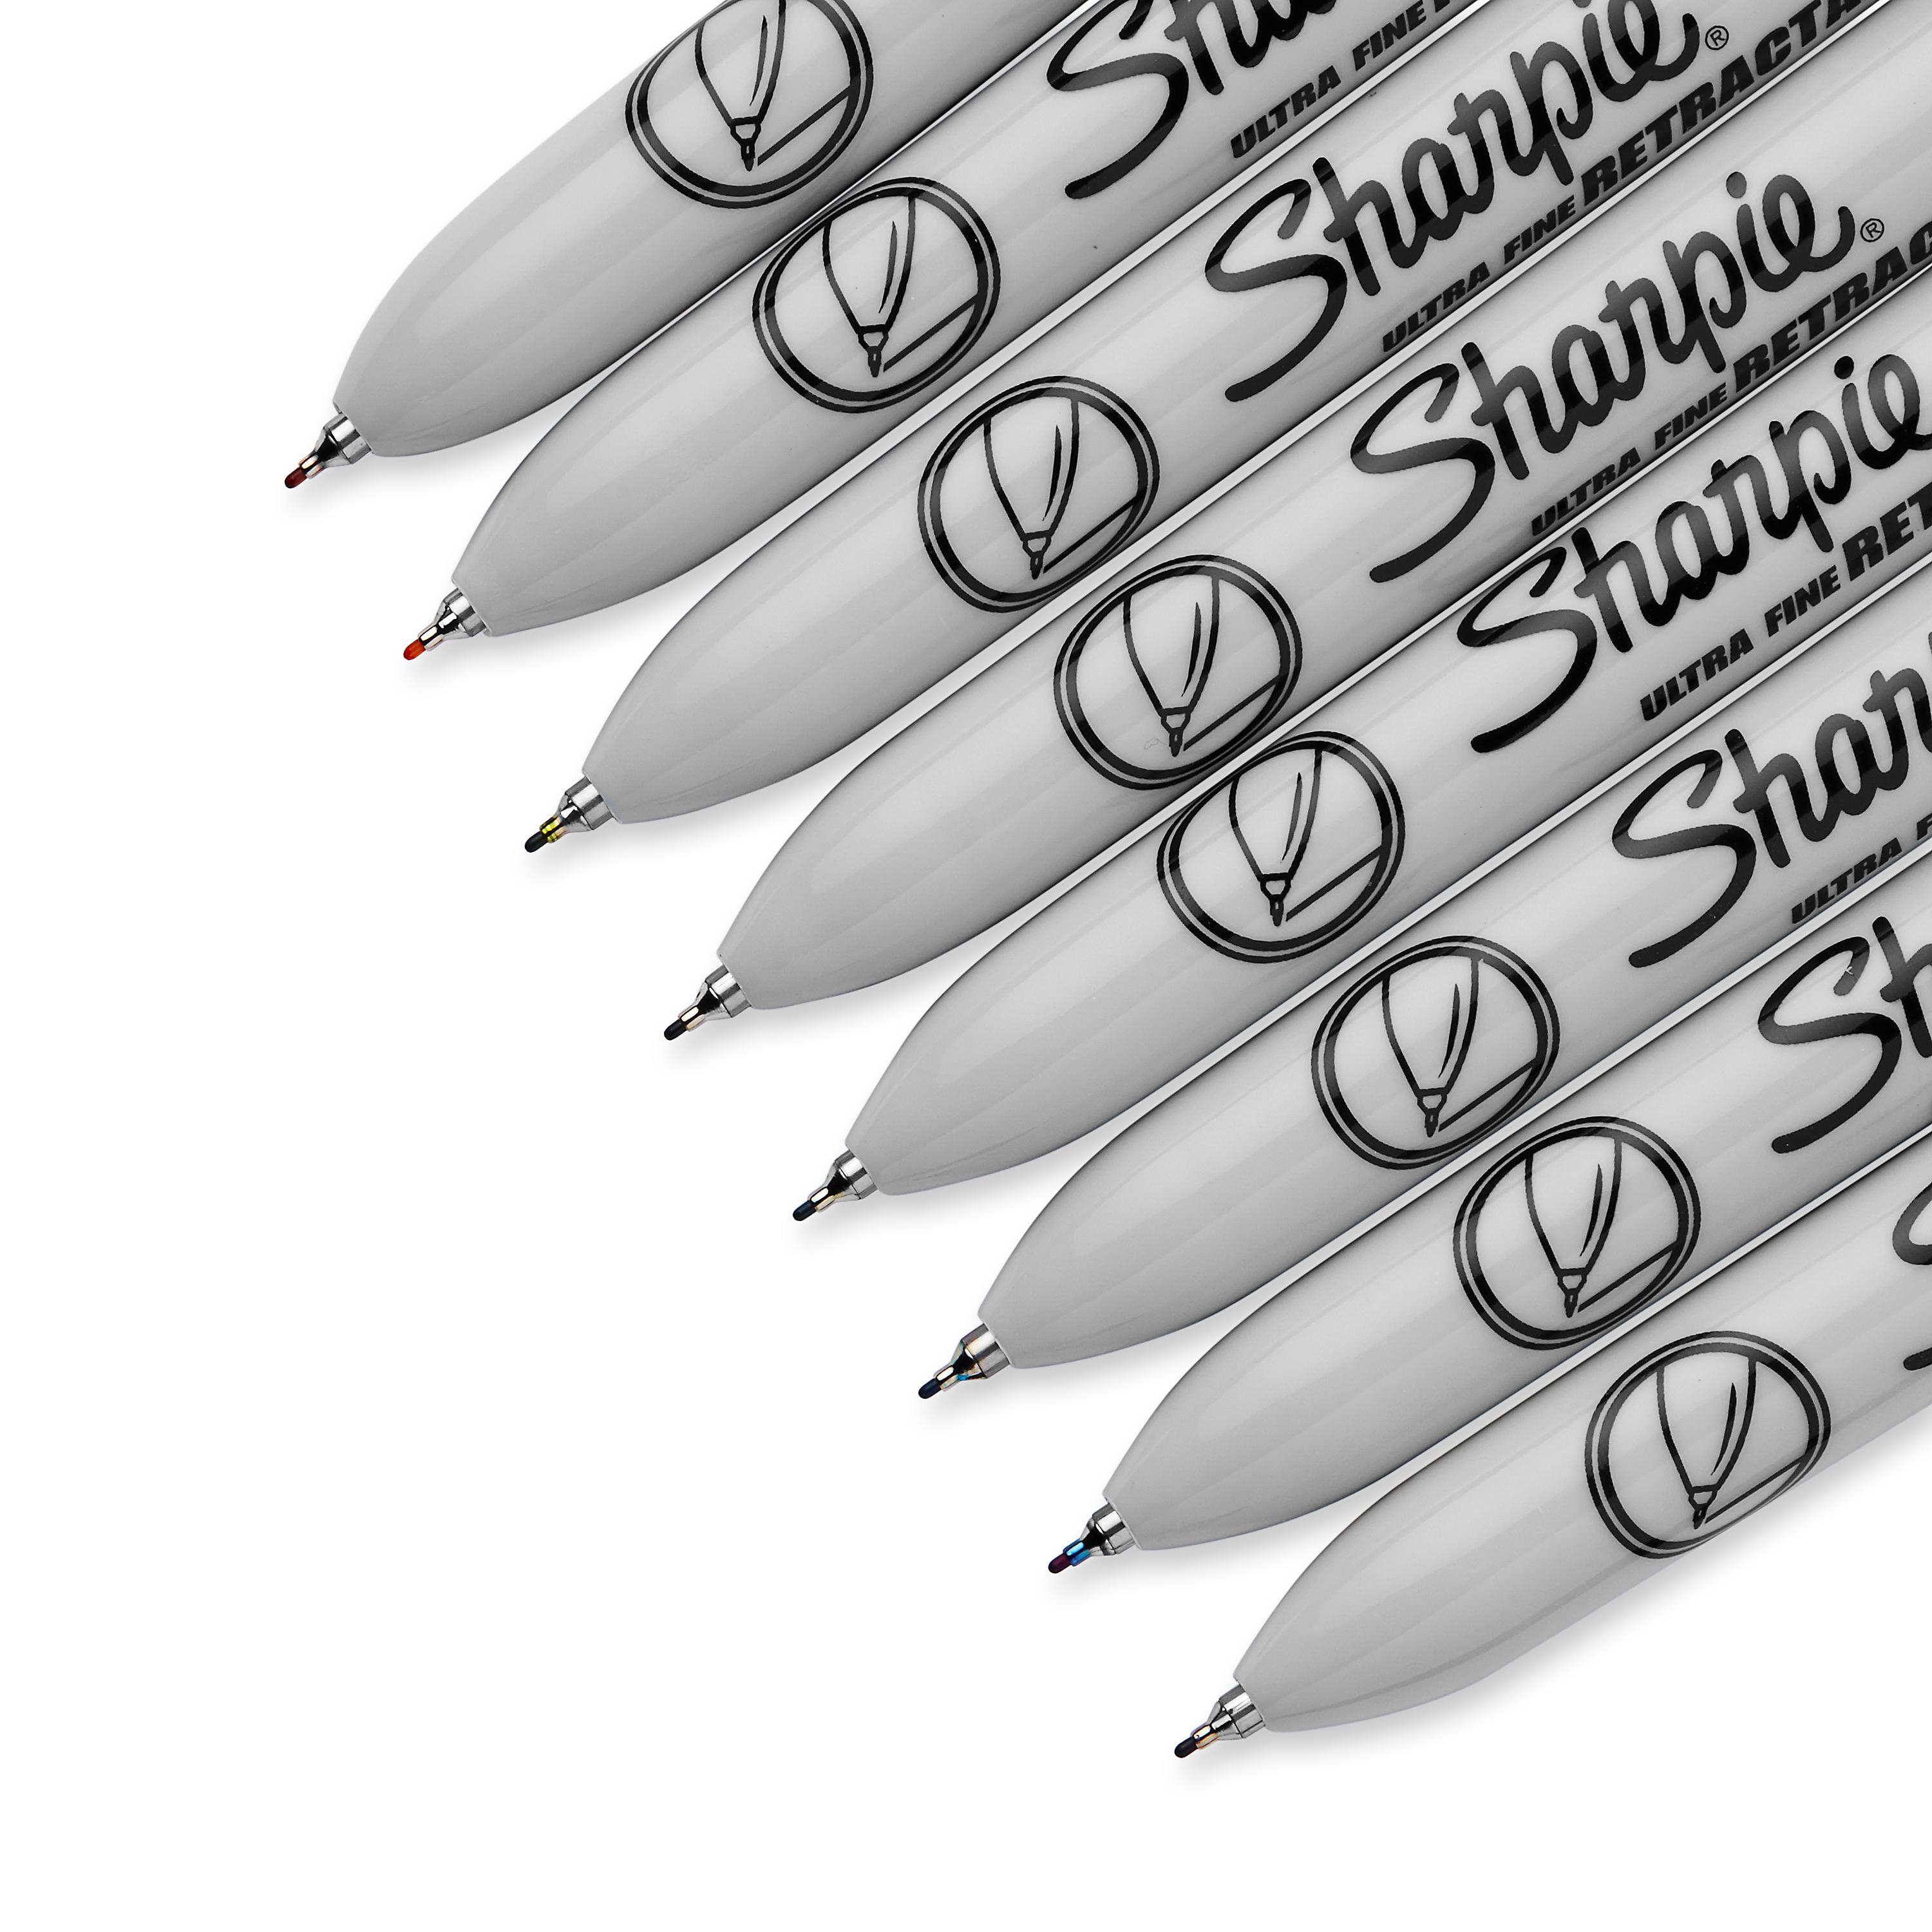 <b>  Ultra Fine Point for Incredible Detail       </b></br>   The retractable ultra-fine tip makes exact marks with precision, rendering letters, sketches, and more in remarkable detail. These Sharpie Permanent Markers are perfect for the class, office, home and beyond. 